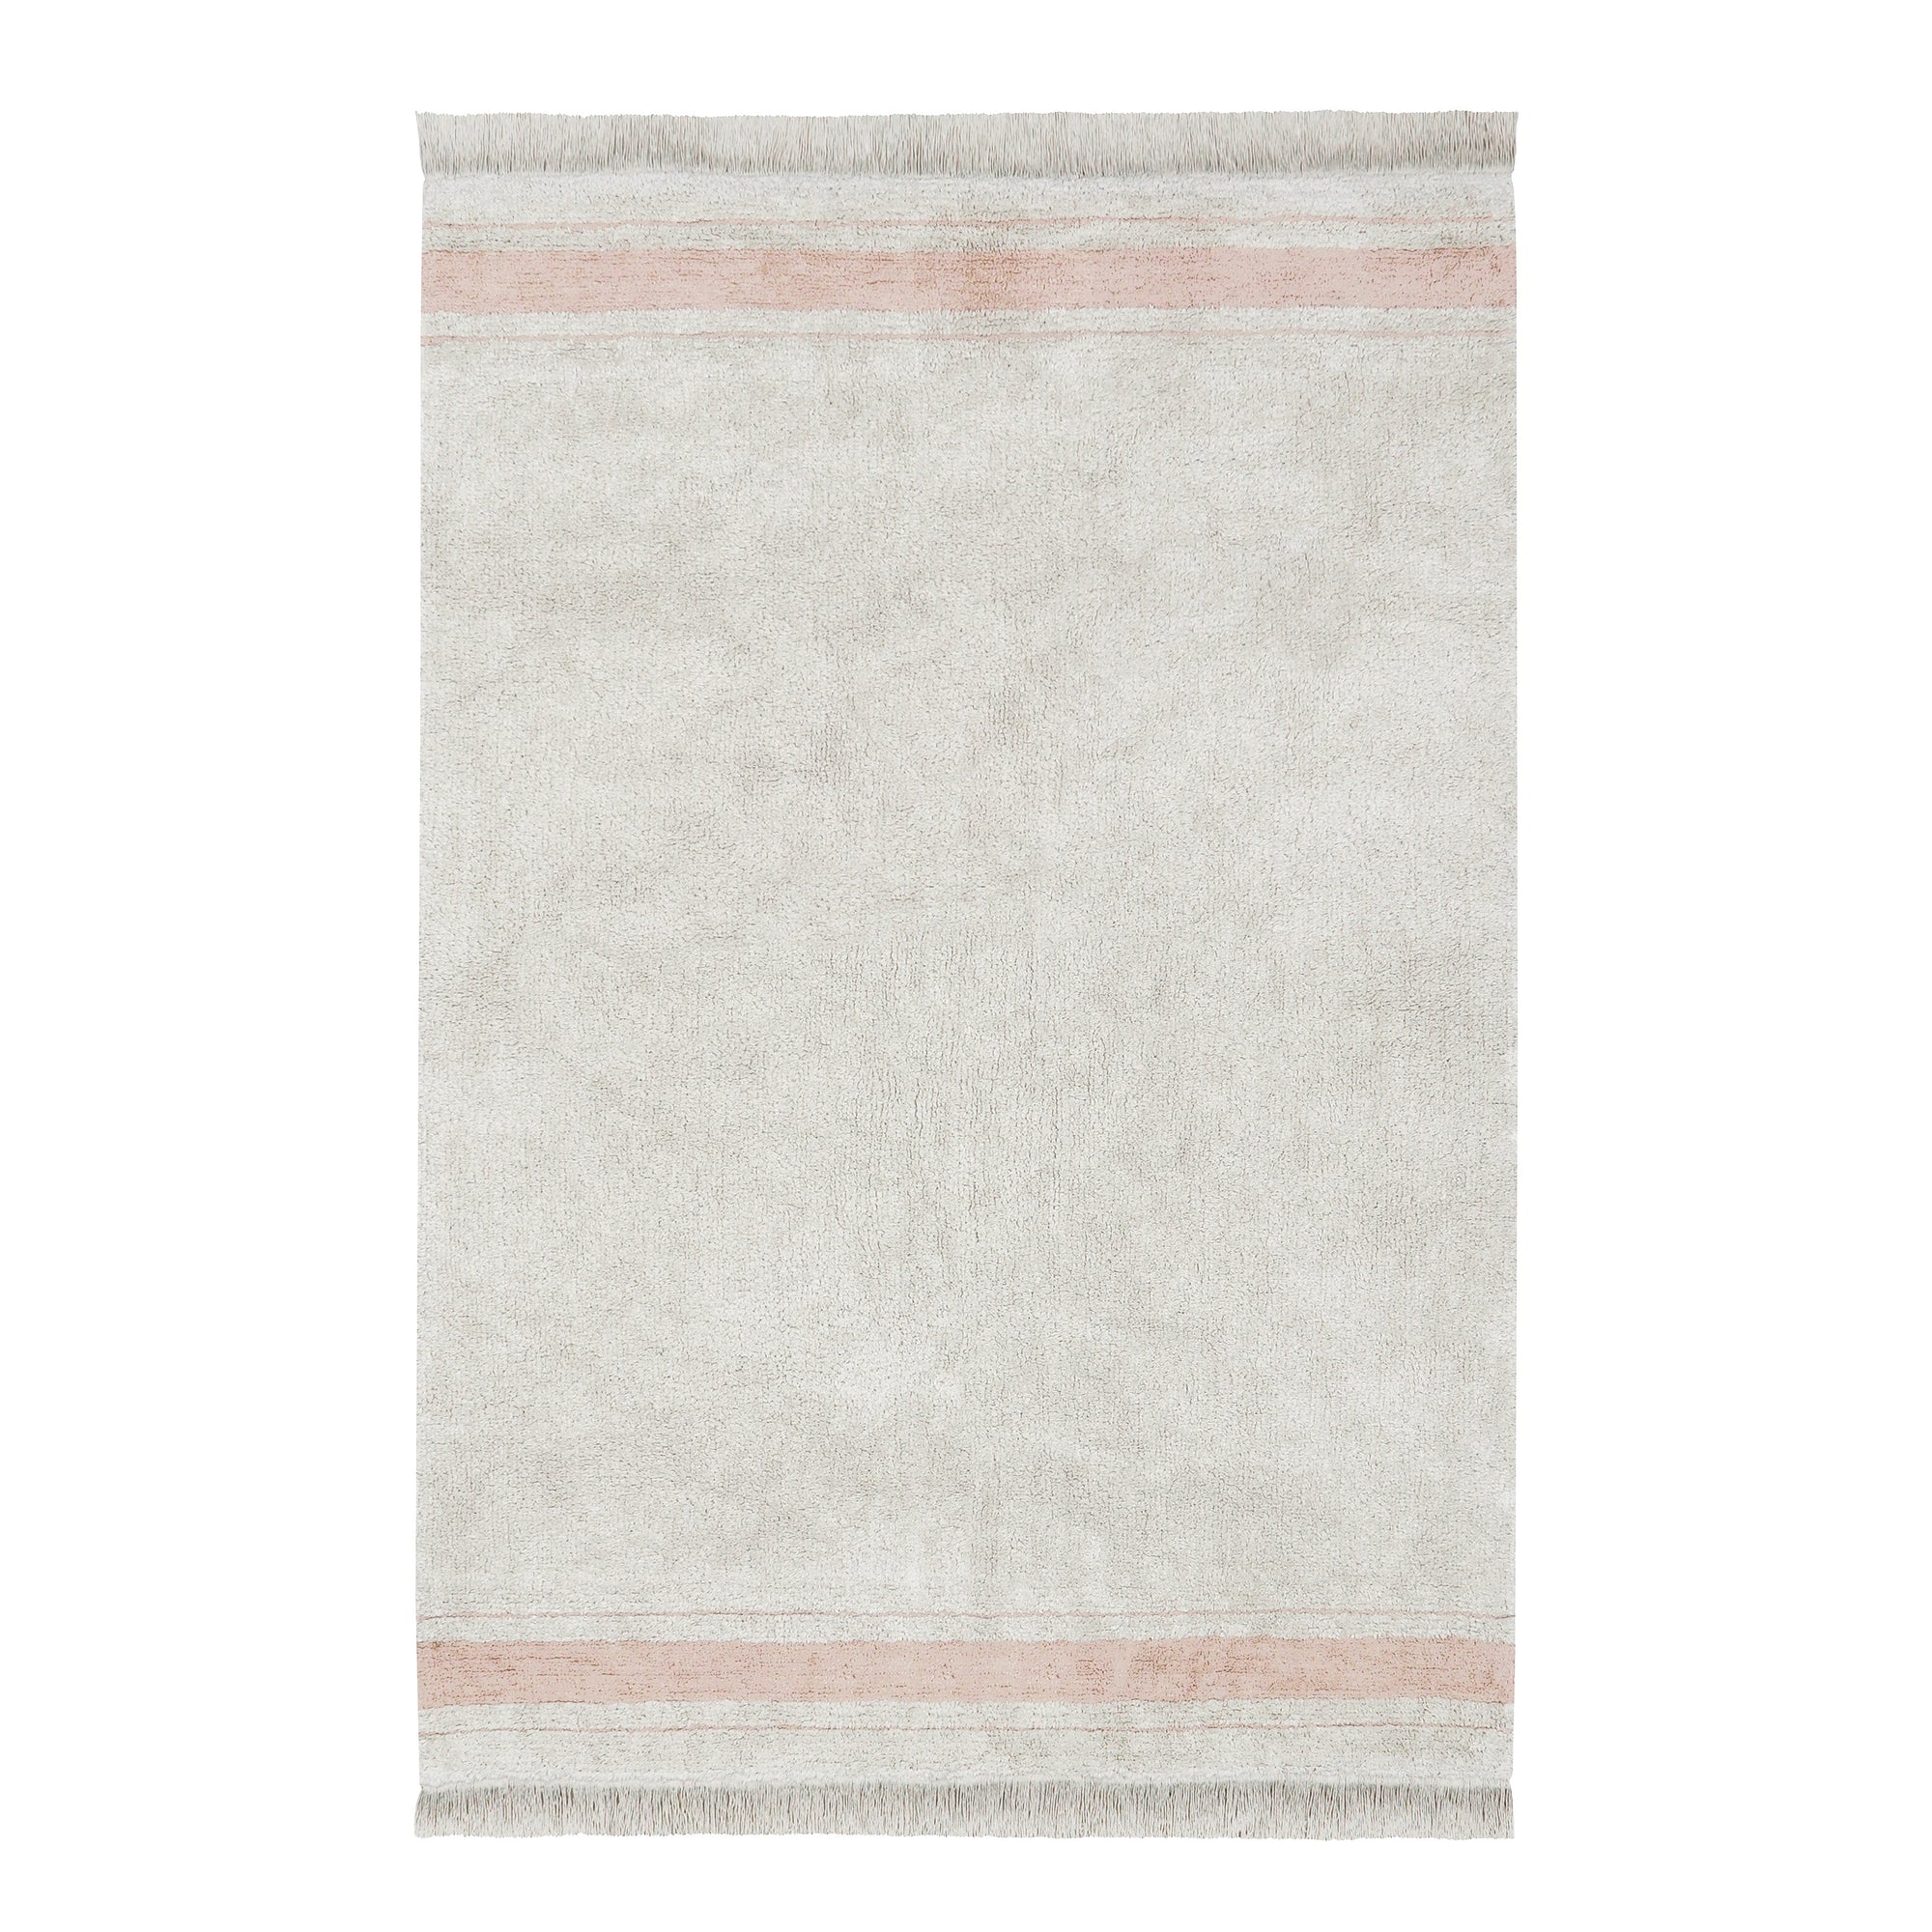 Lorena Canals Little Chefs Gastro Rose Washable Rug